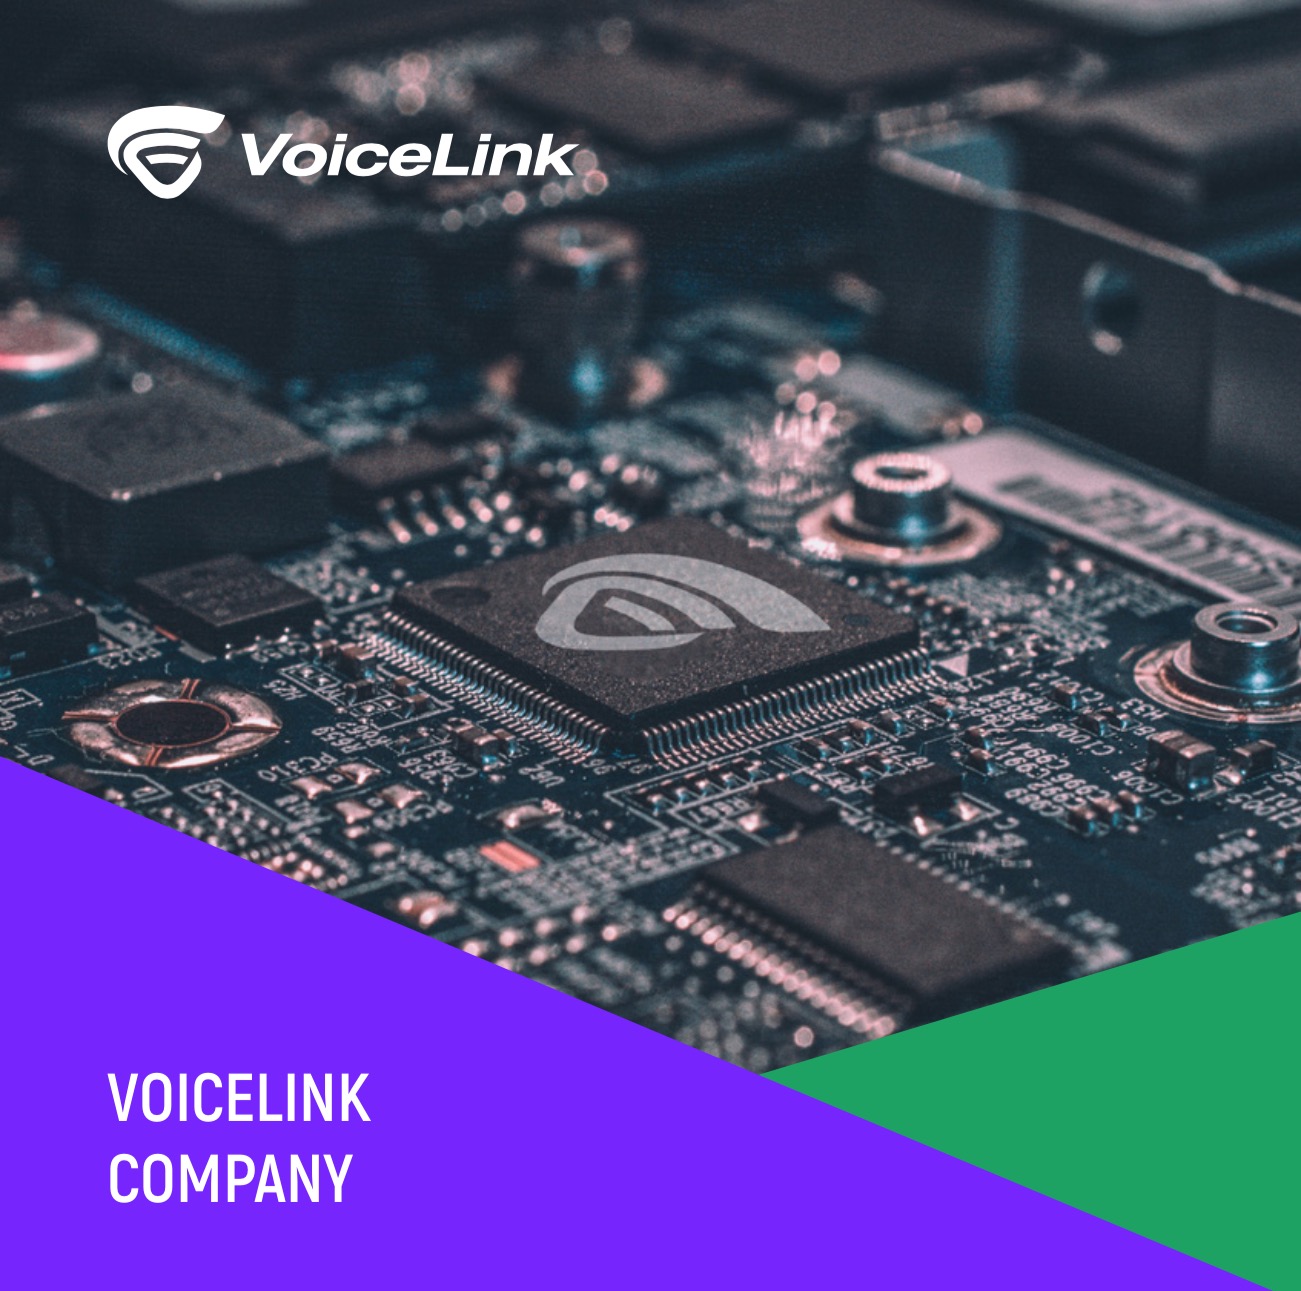  About VoiceLink